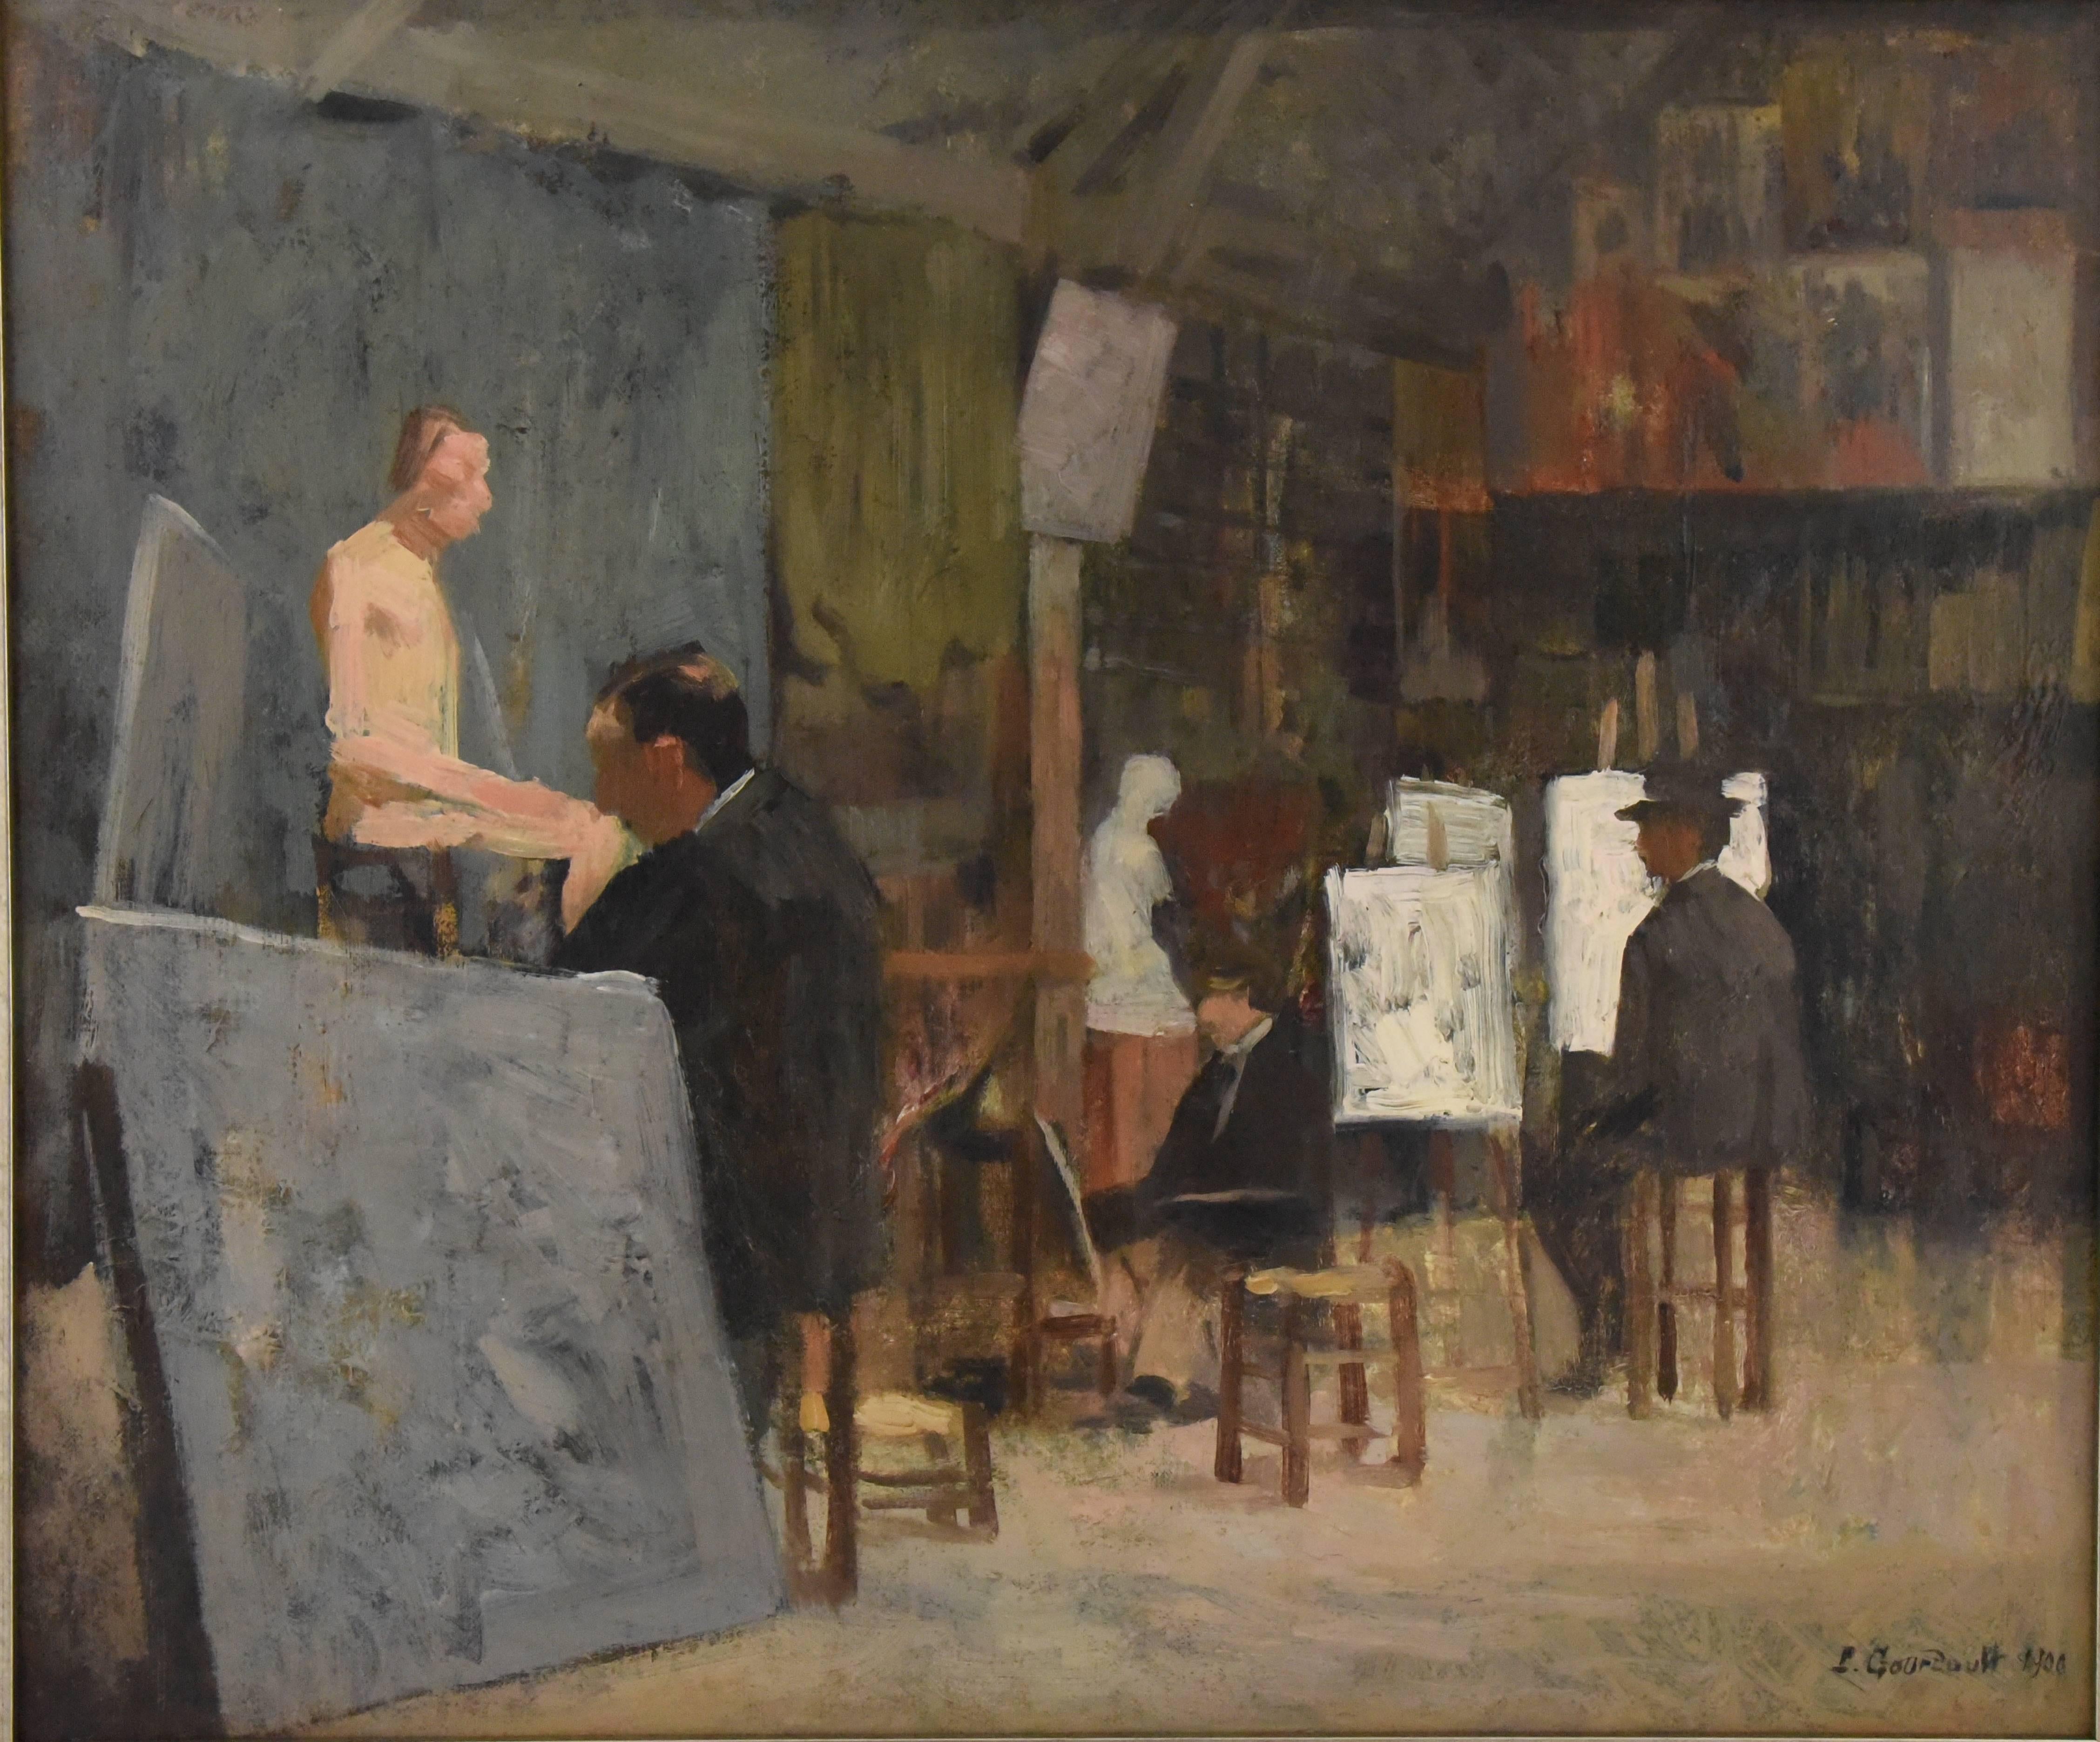 French painting of artists in a painting class or workshop by Pierre Gourdault. 
Signature/ Marks: P. Gourdault, 1900
Style: Impressionst
Date: 1900
Material: Oil paint on canvas. Contemporary frame.
Origin: France
Size: H. 59 cm x L. 68 cm. x